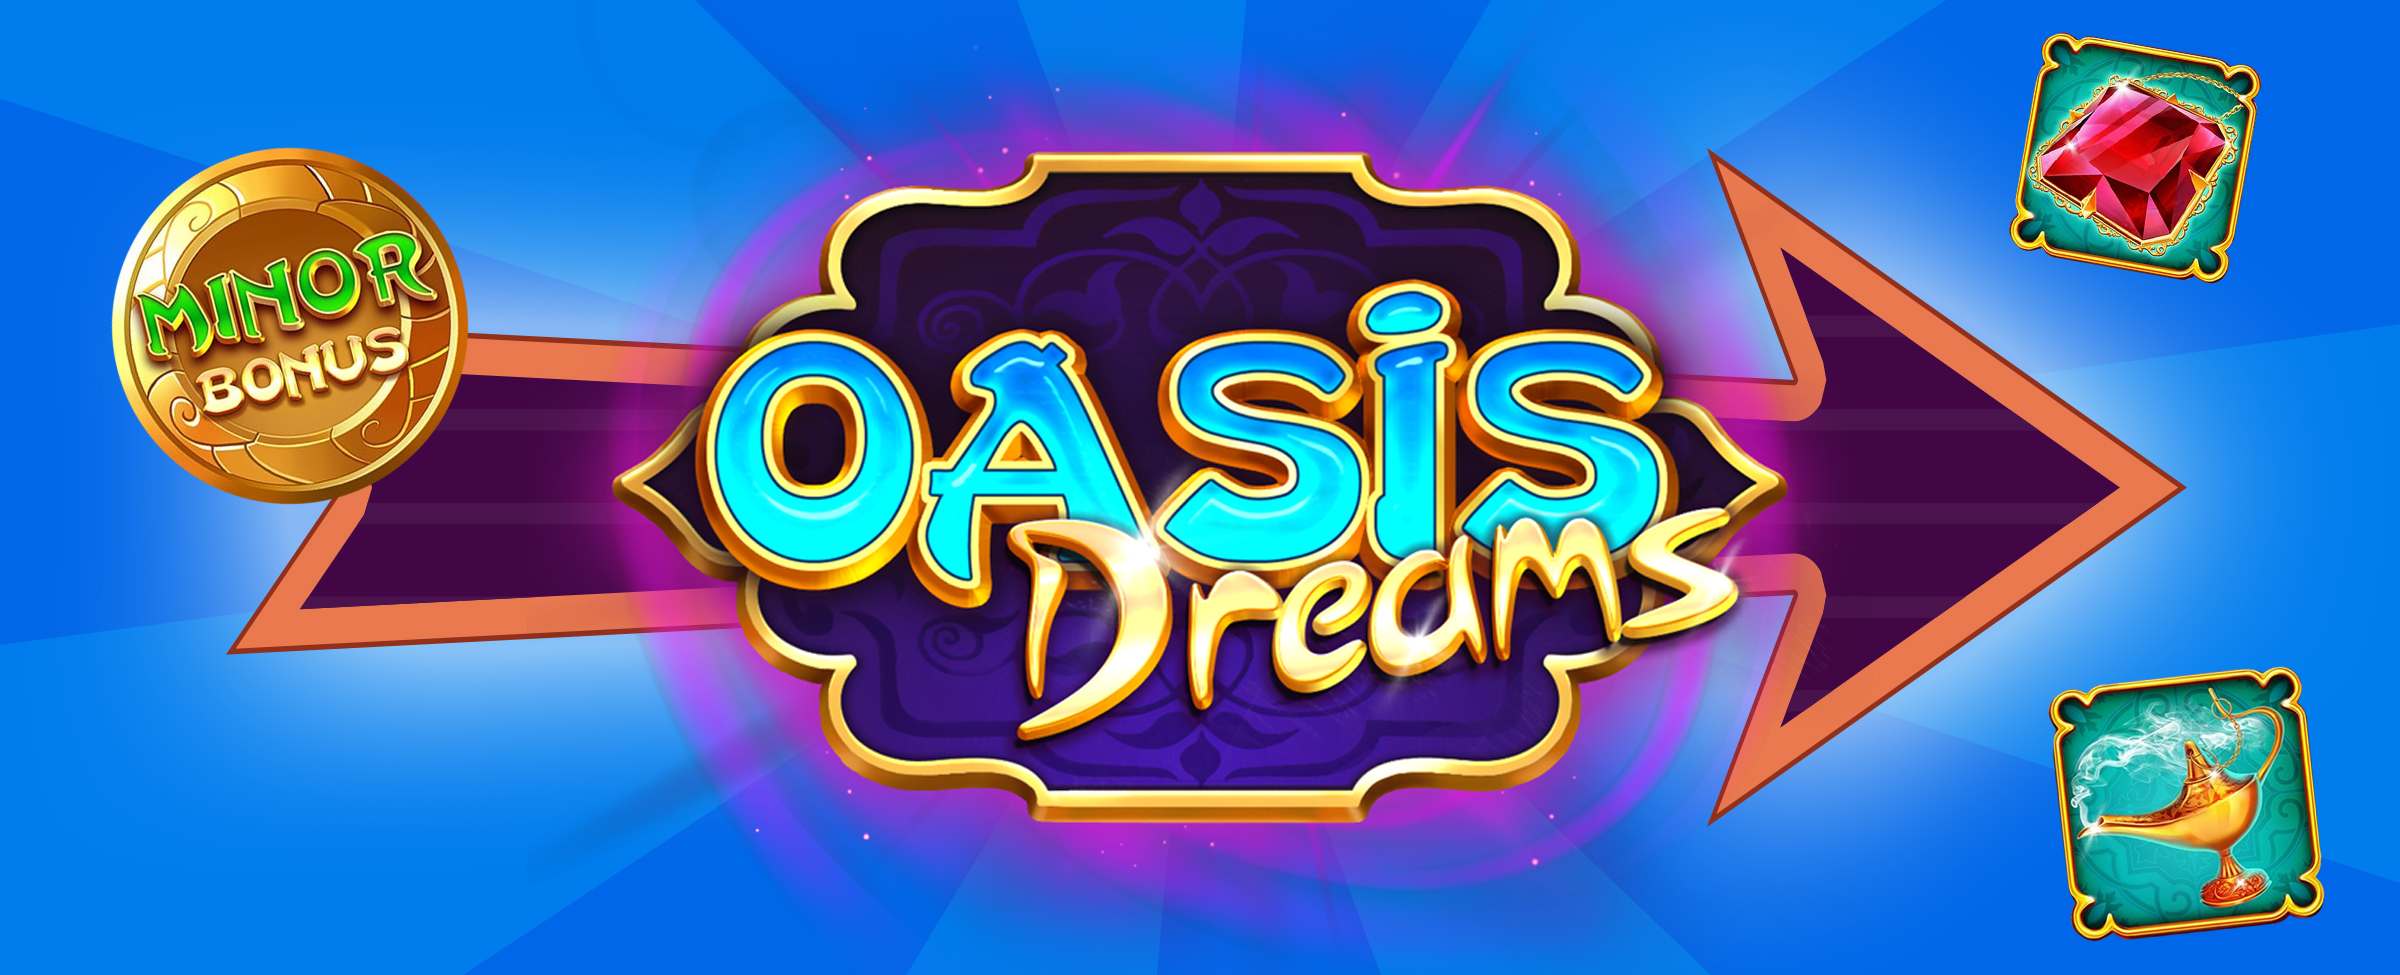 Set against a duo-tone blue background and a purple arrow with its tip pointed to the right, is the main logo from the Cafe Casino slots game, Oasis Dreams Hot Drop Jackpots. To the right are two game symbols featuring a red gem and a gold genie lamp, with a gold icon on the left with the words “minor bonus” stamped over the top.